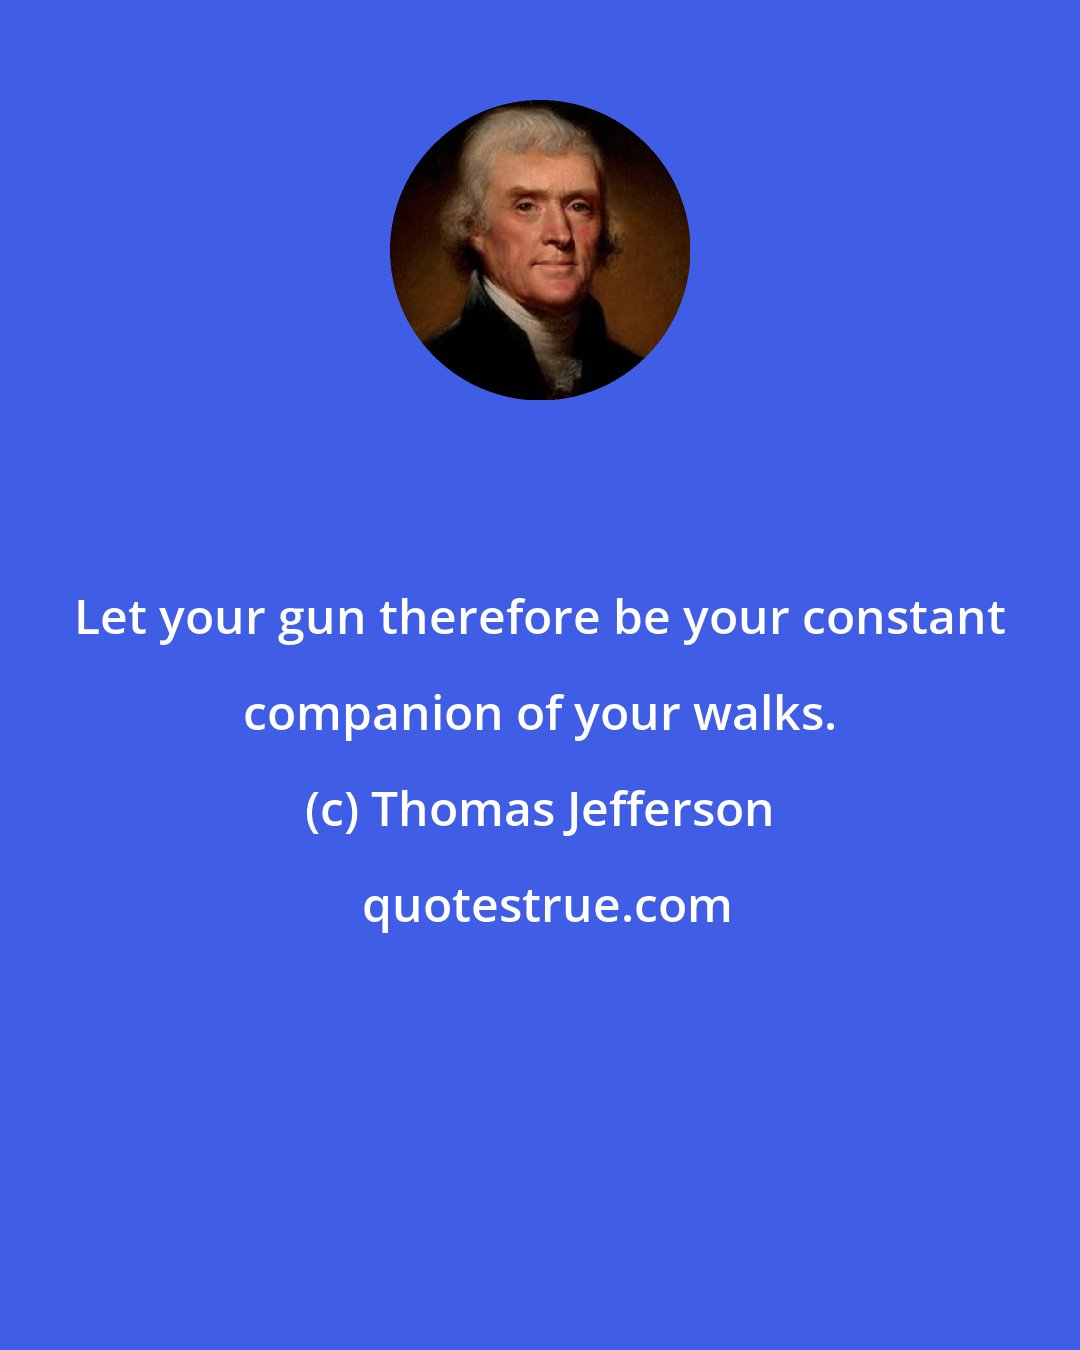 Thomas Jefferson: Let your gun therefore be your constant companion of your walks.